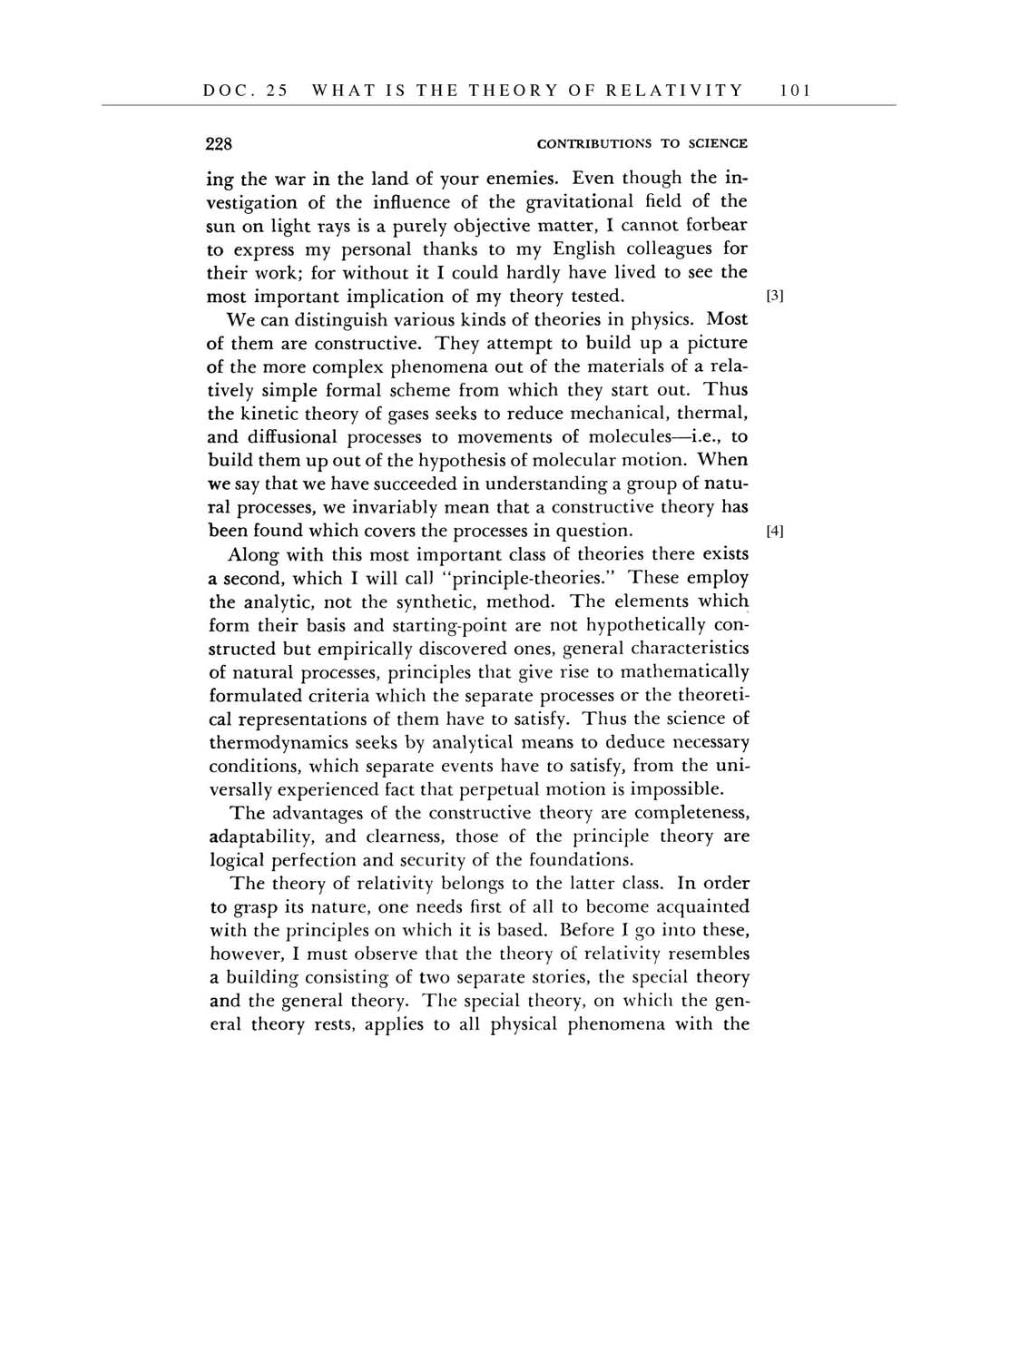 Volume 7: The Berlin Years: Writings, 1918-1921 (English translation supplement) page 101